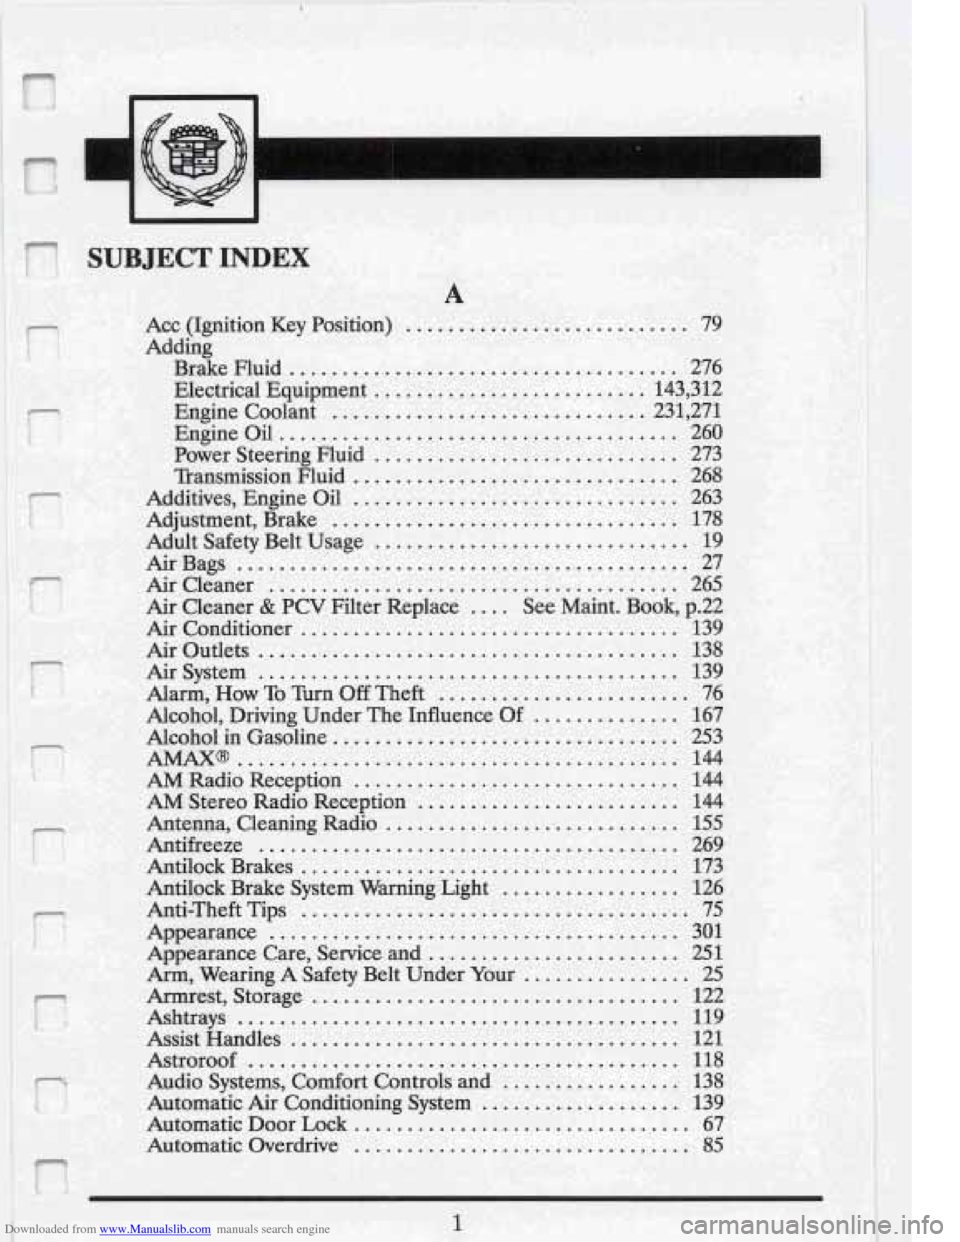 CADILLAC FLEETWOOD 1993 2.G Owners Manual Downloaded from www.Manualslib.com manuals search engine .5 . I .I 
? 
i SUBJECT p 9.- . 8 -.&$ INDEX . .;. ,.& 
a3m: & m-h > d ........ .A< c- .-*.%A .. 
ACC  (Ignition  Key  Position) ..........